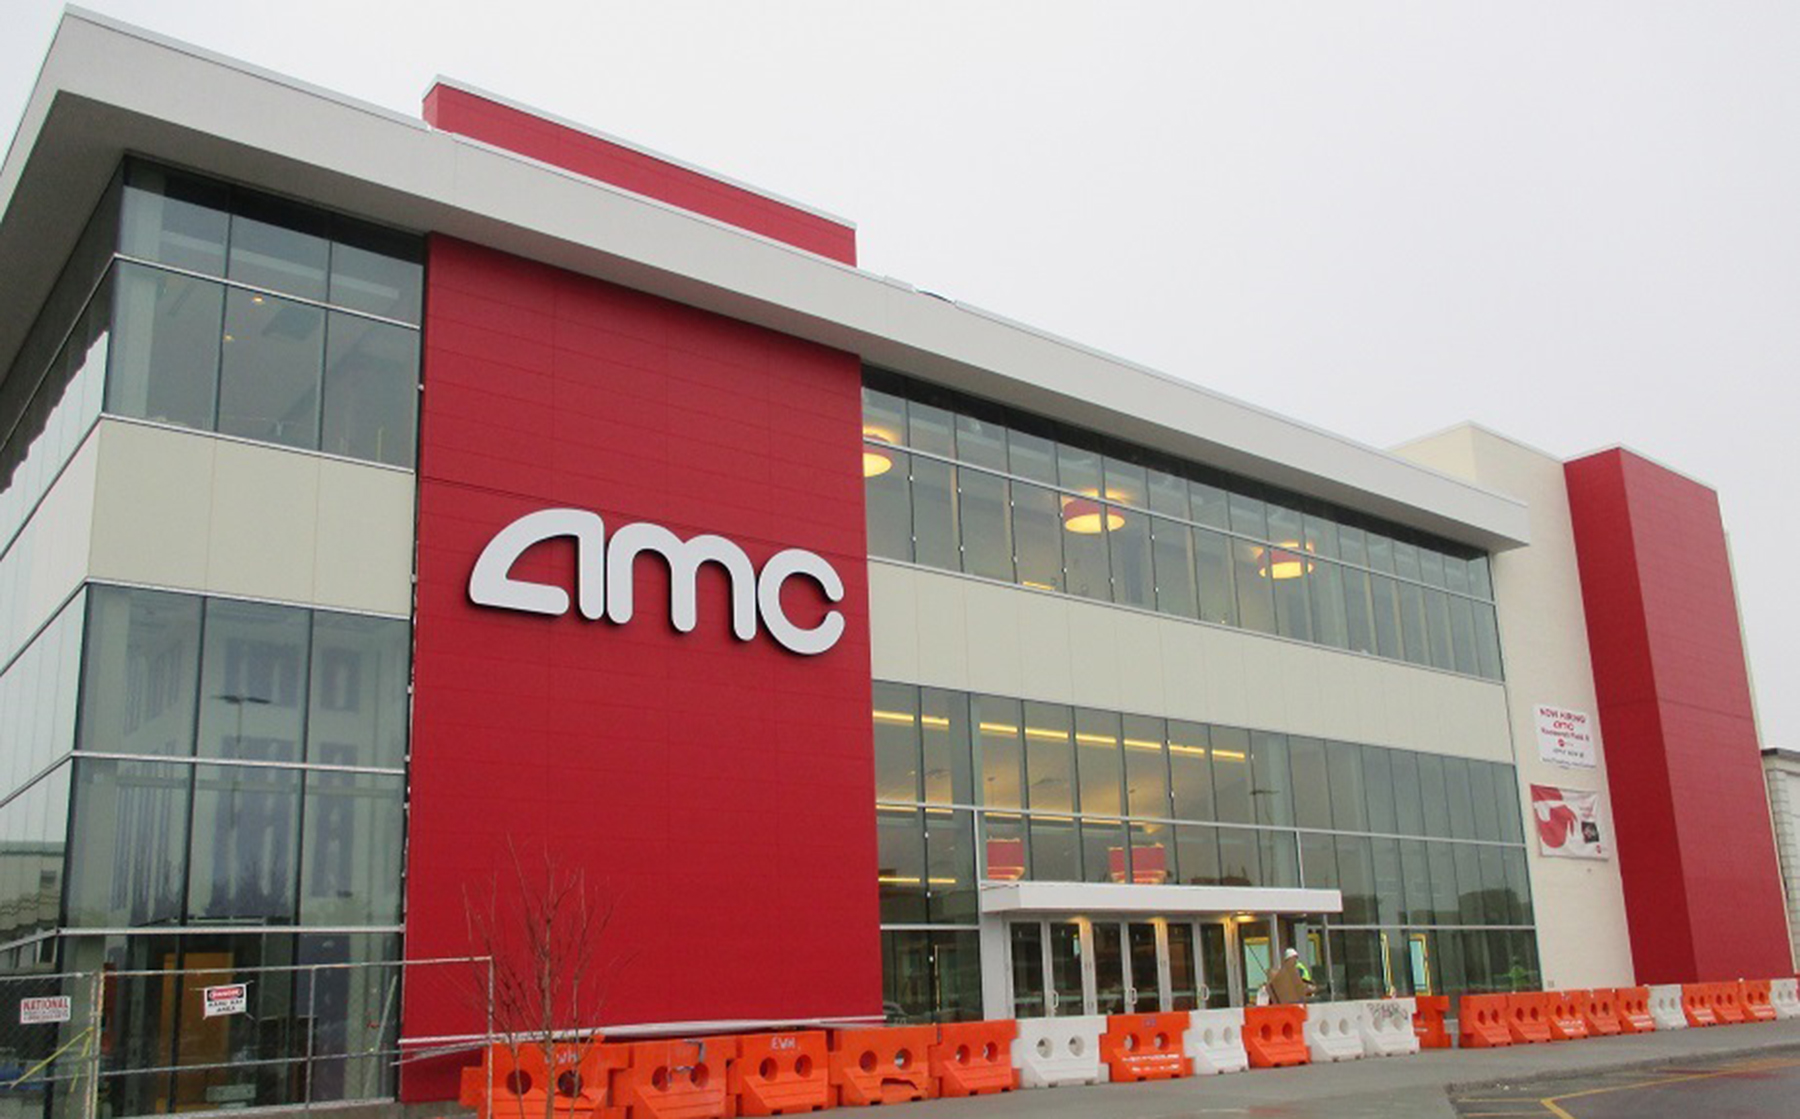 E.W. Howell completes renovation of 43,756 s/f AMC movie theater